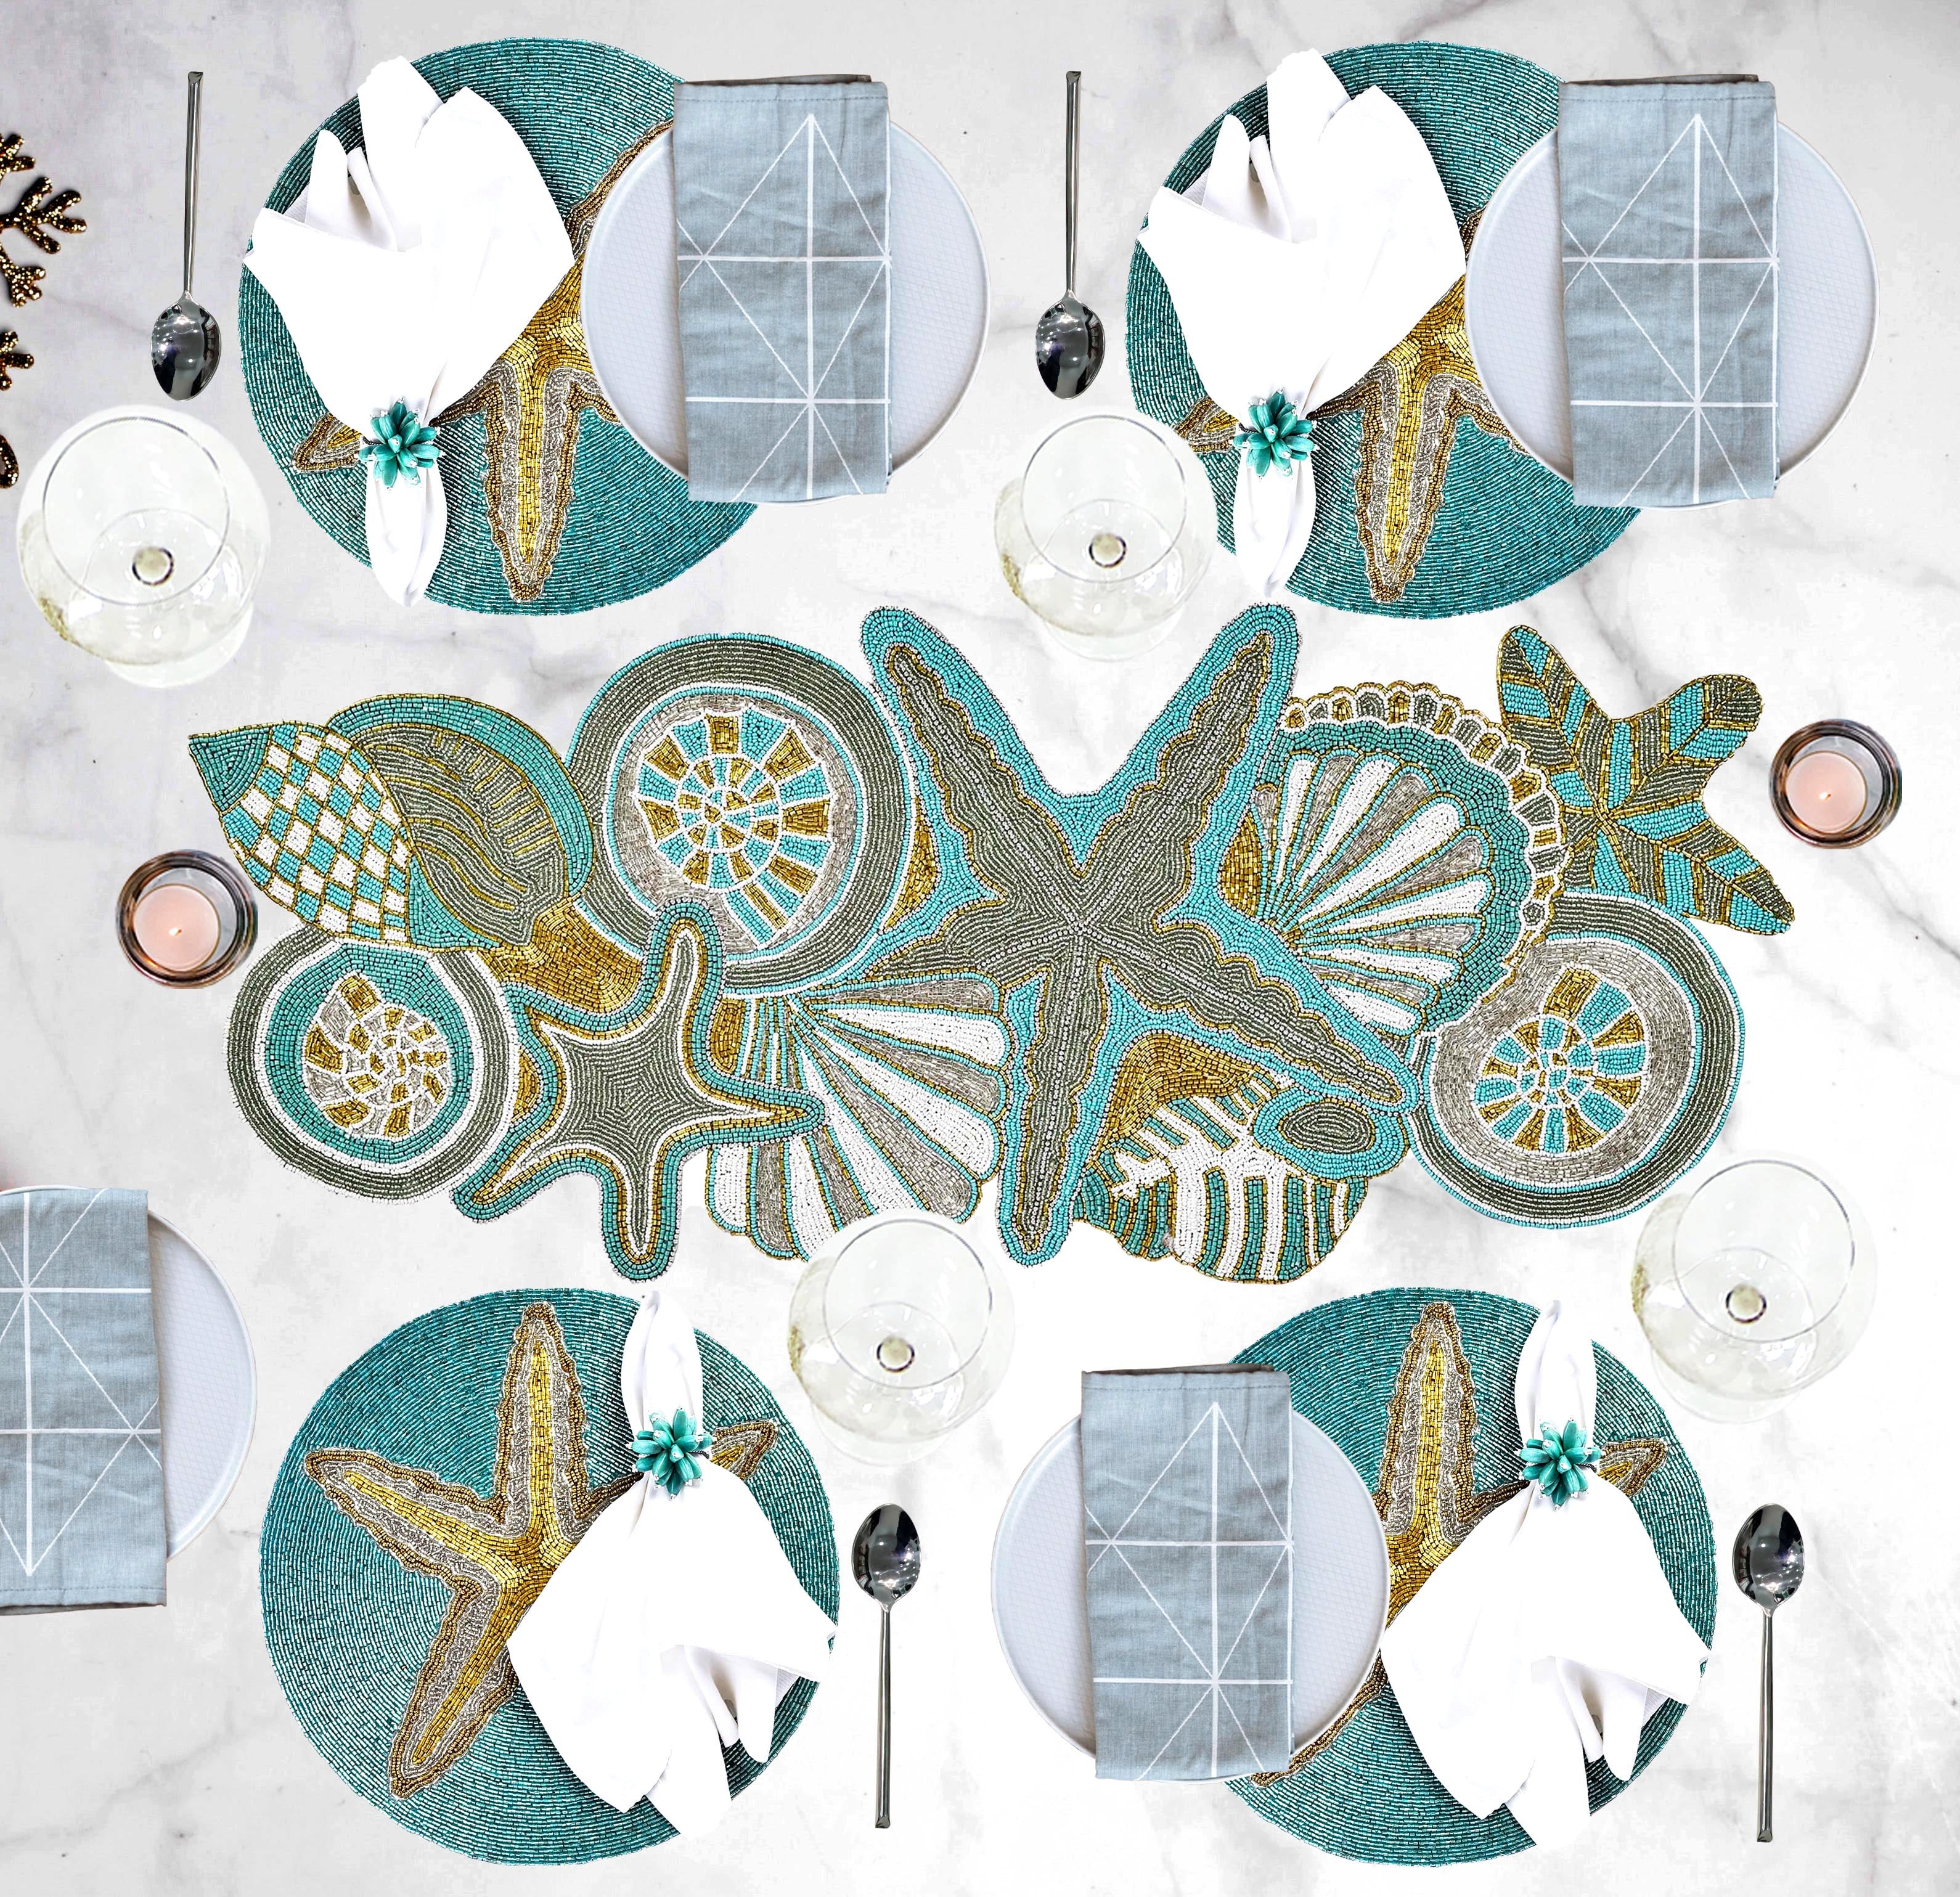 The 'Teal Envy' Place Setting for 4 - Placemats, Chargers, Napkin Rings & Table Runner